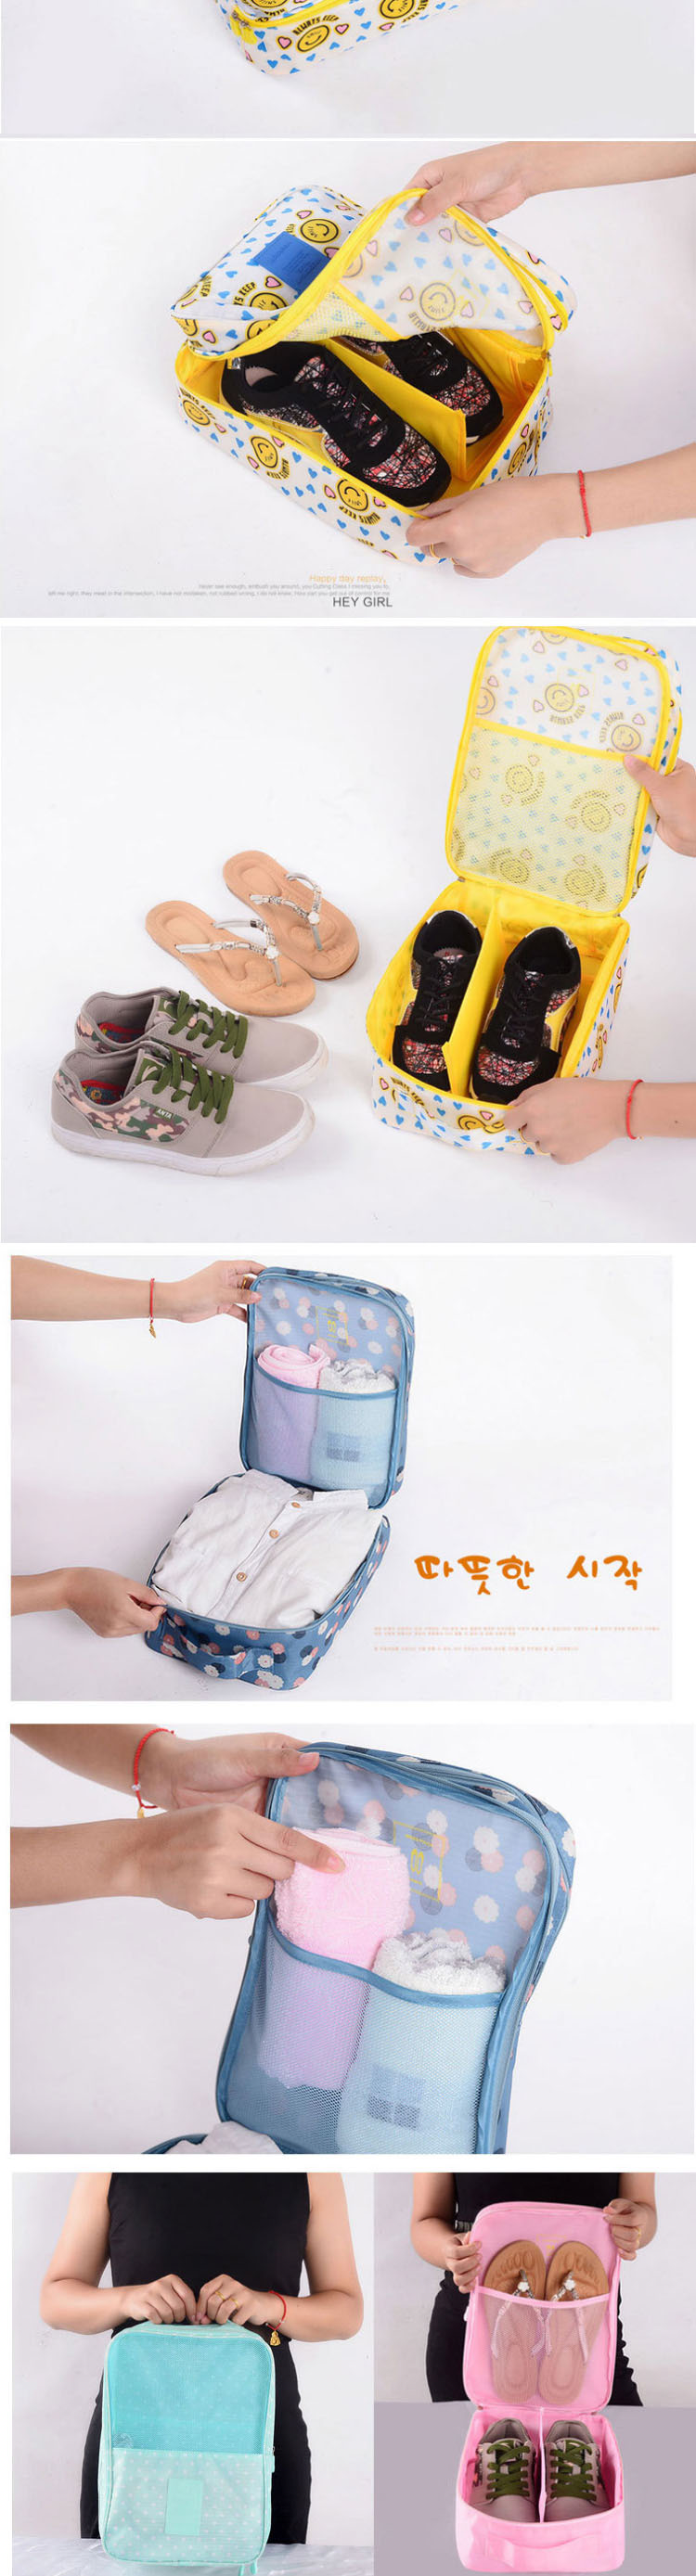 Traveling and receiving bags, packing shoes and shoes bag travel necessary luggage suitcase waterproof shoe bag shoe box three generation shoe bag3